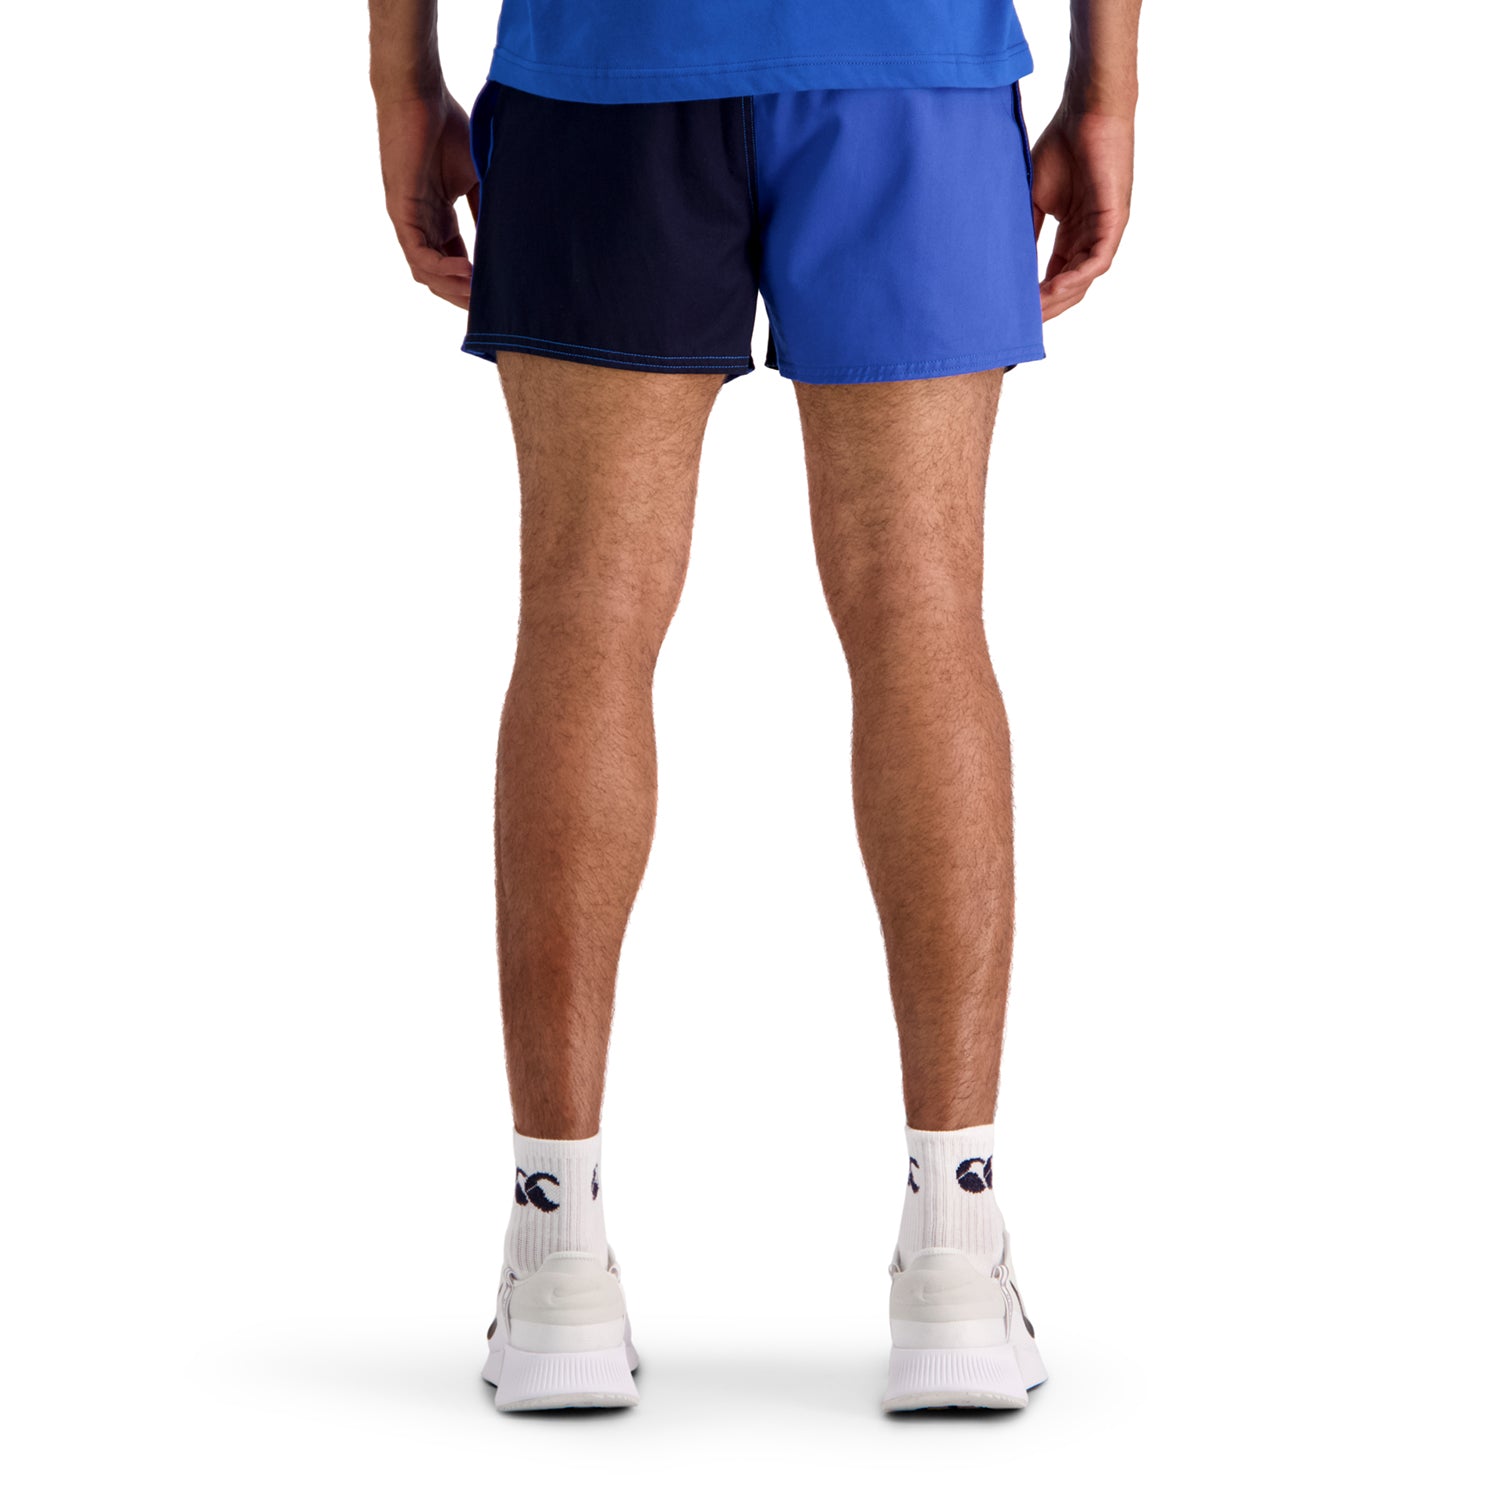 Uglies 3" Harlequin Shorts H2 22 - The Rugby Shop Darwin